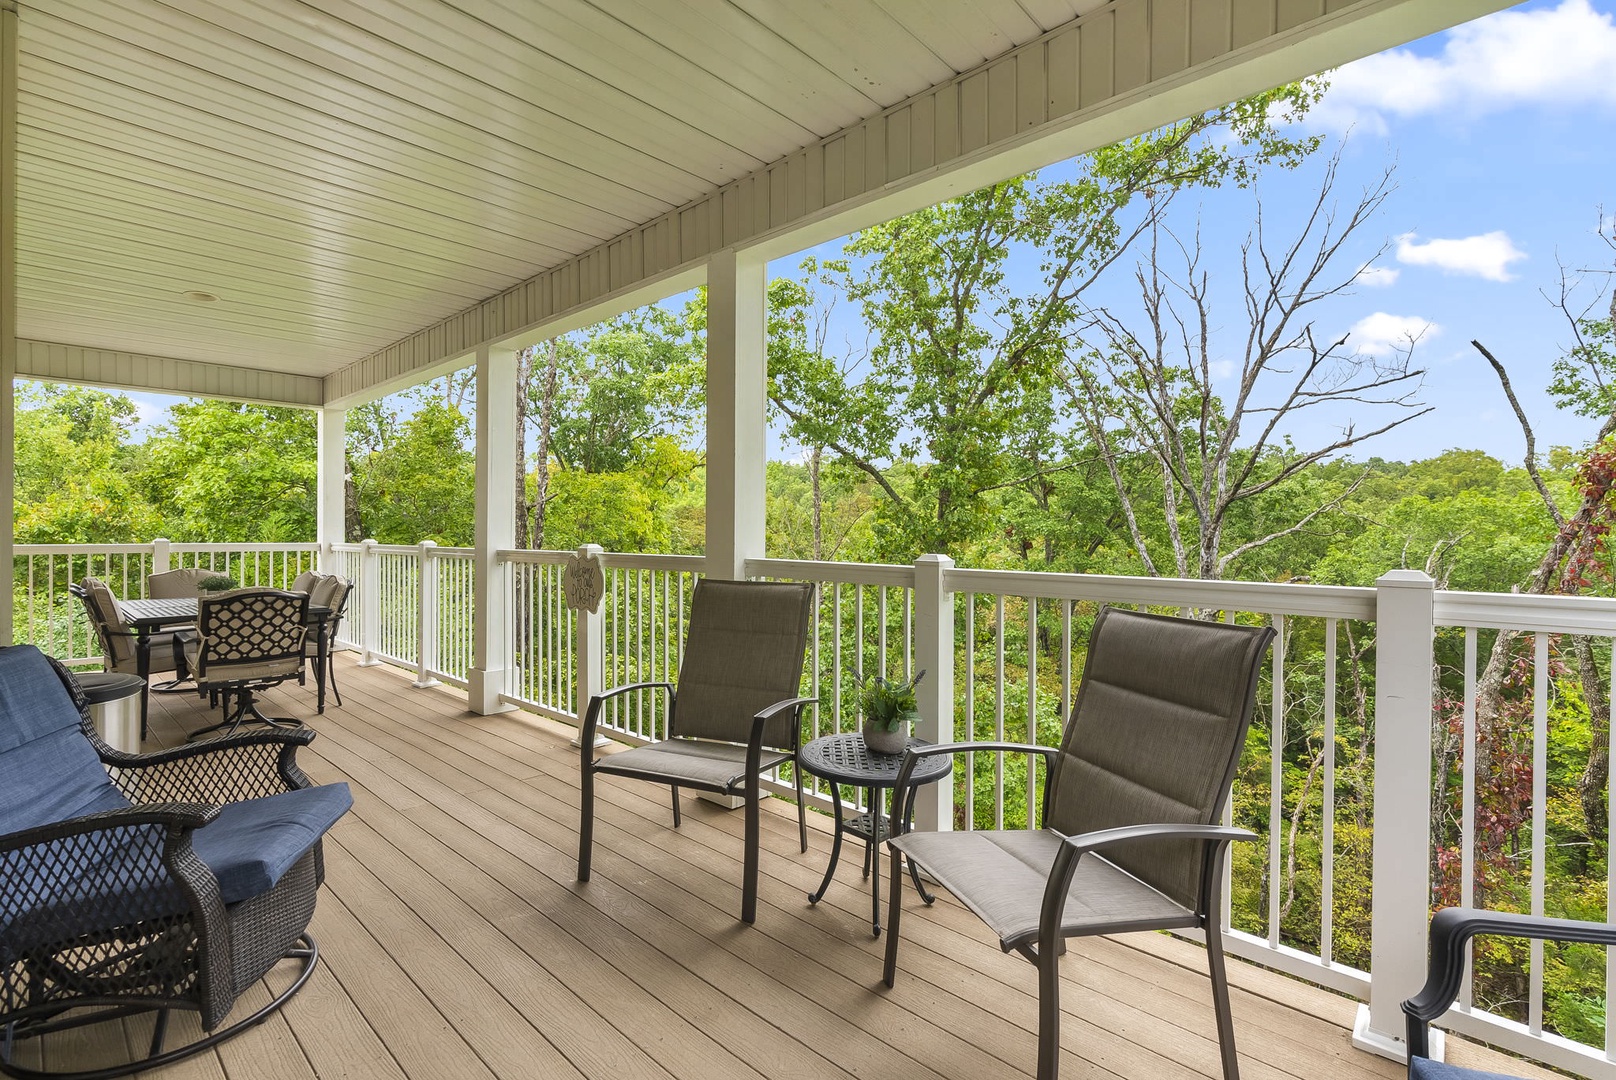 Large deck with outdoor seating and amazing views